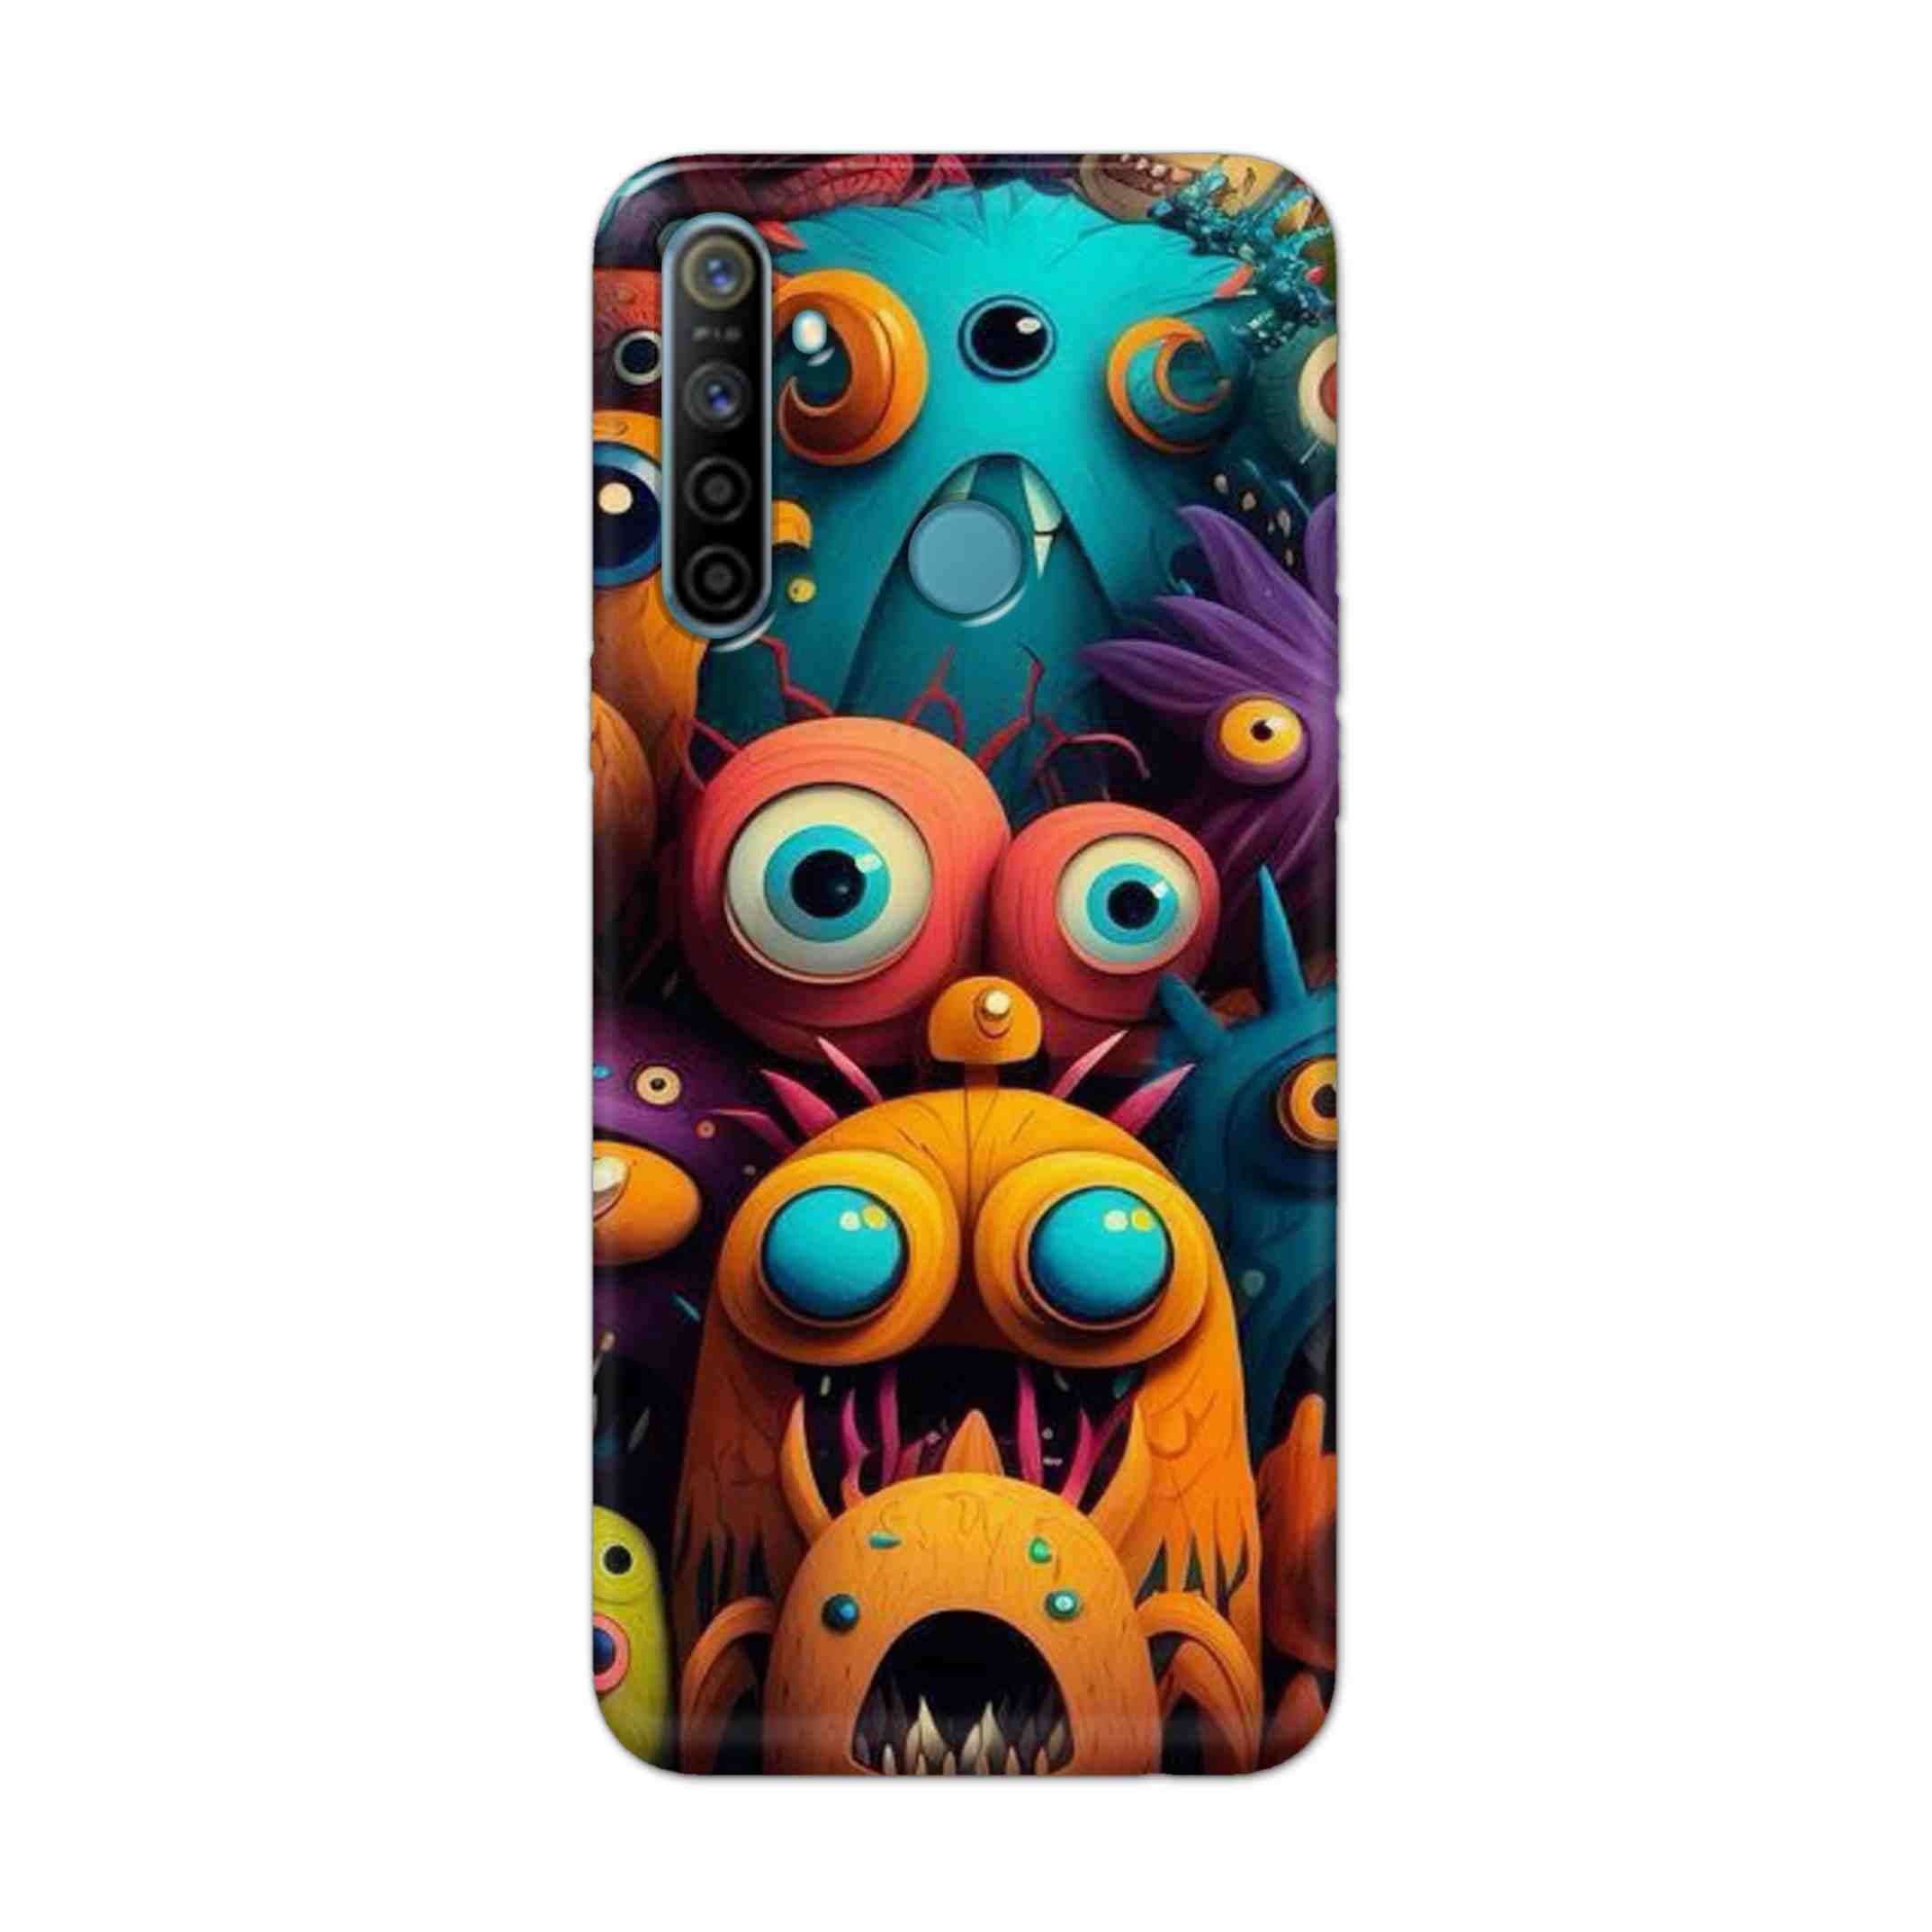 Buy Zombie Hard Back Mobile Phone Case Cover For Realme 5i Online